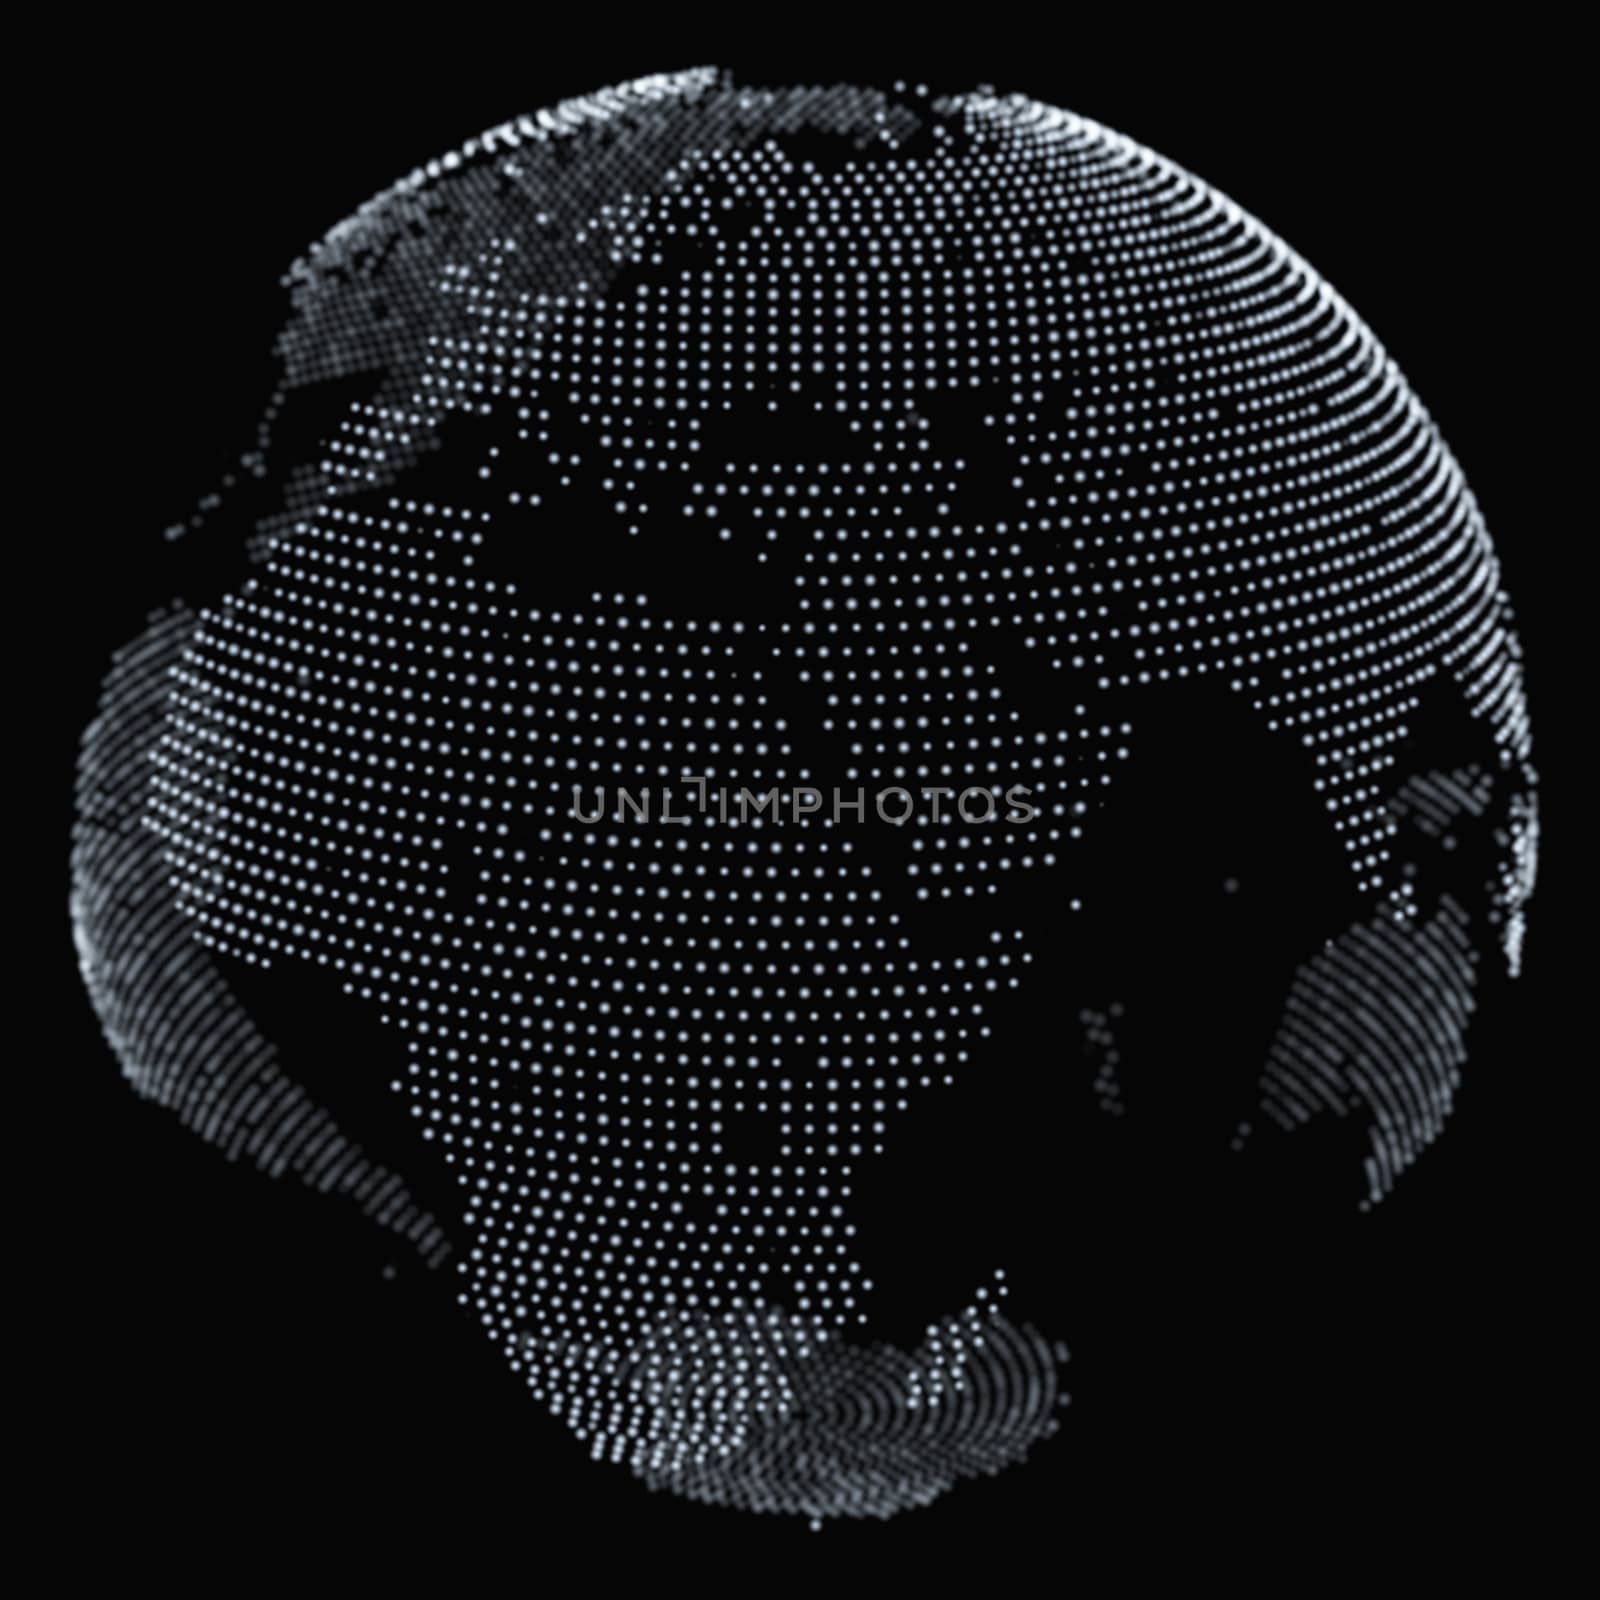 Dotted world globe. Template for your design by cherezoff